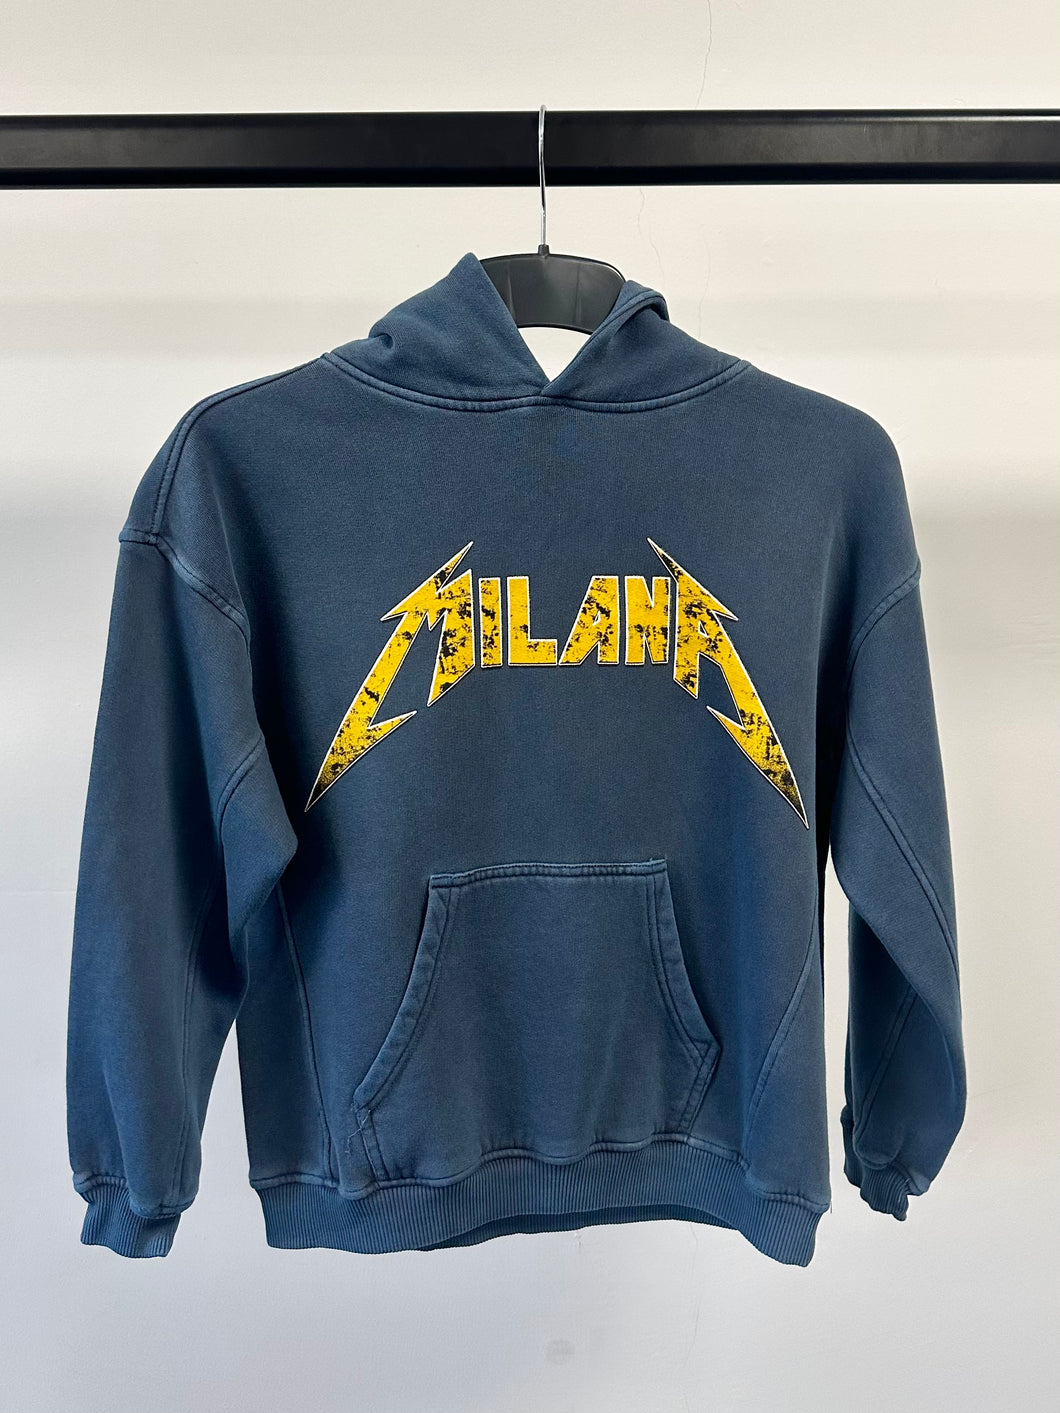 Washed Blue Kids Graphic Hoodie.